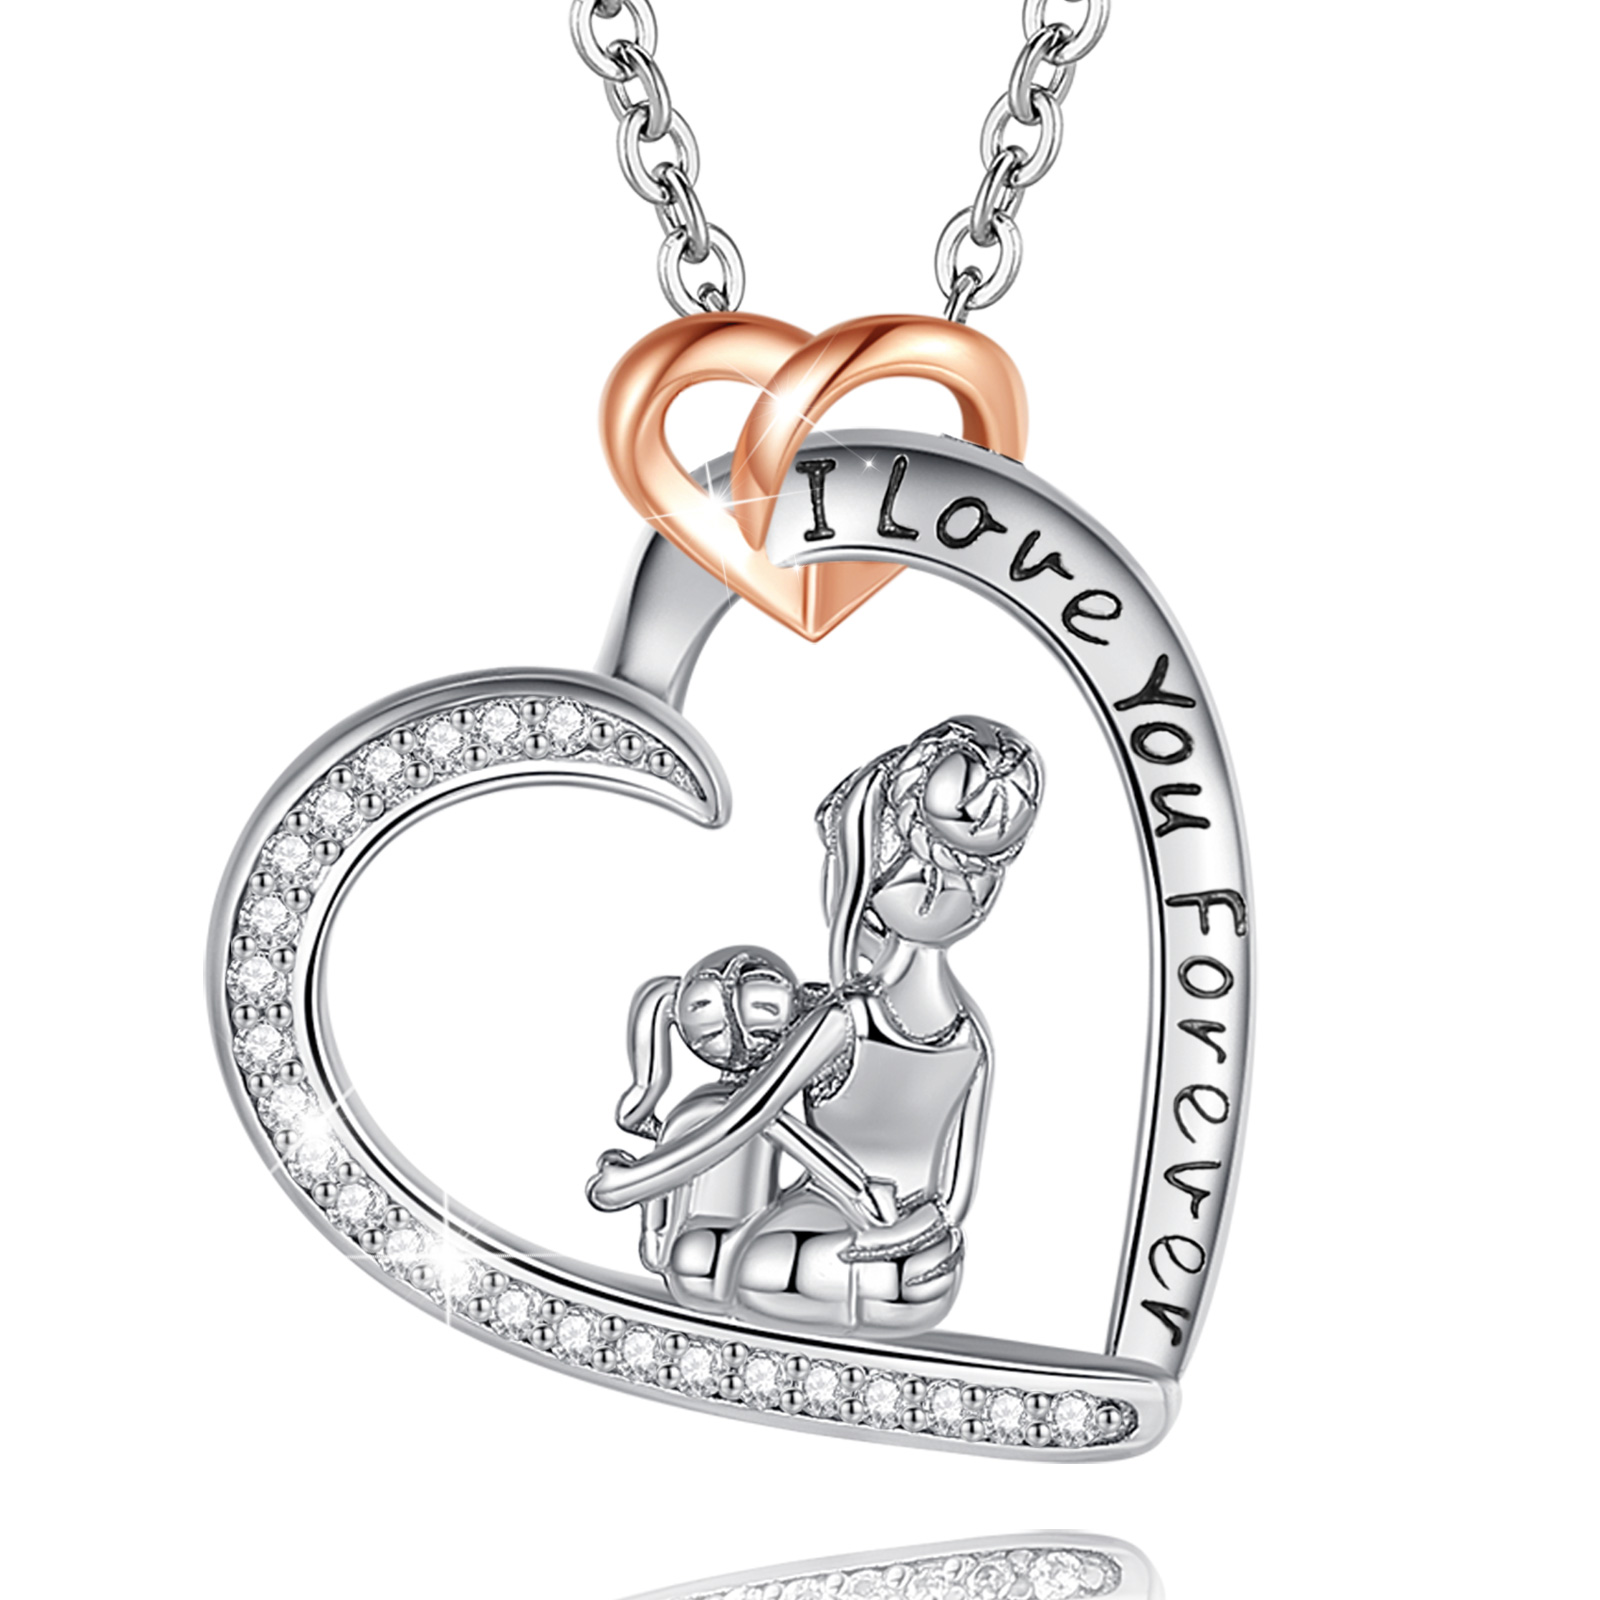 Merryshine Jewelry S925 Sterling Silver CZ Mom and Daughter Heart Necklace for Mother's Day Gift